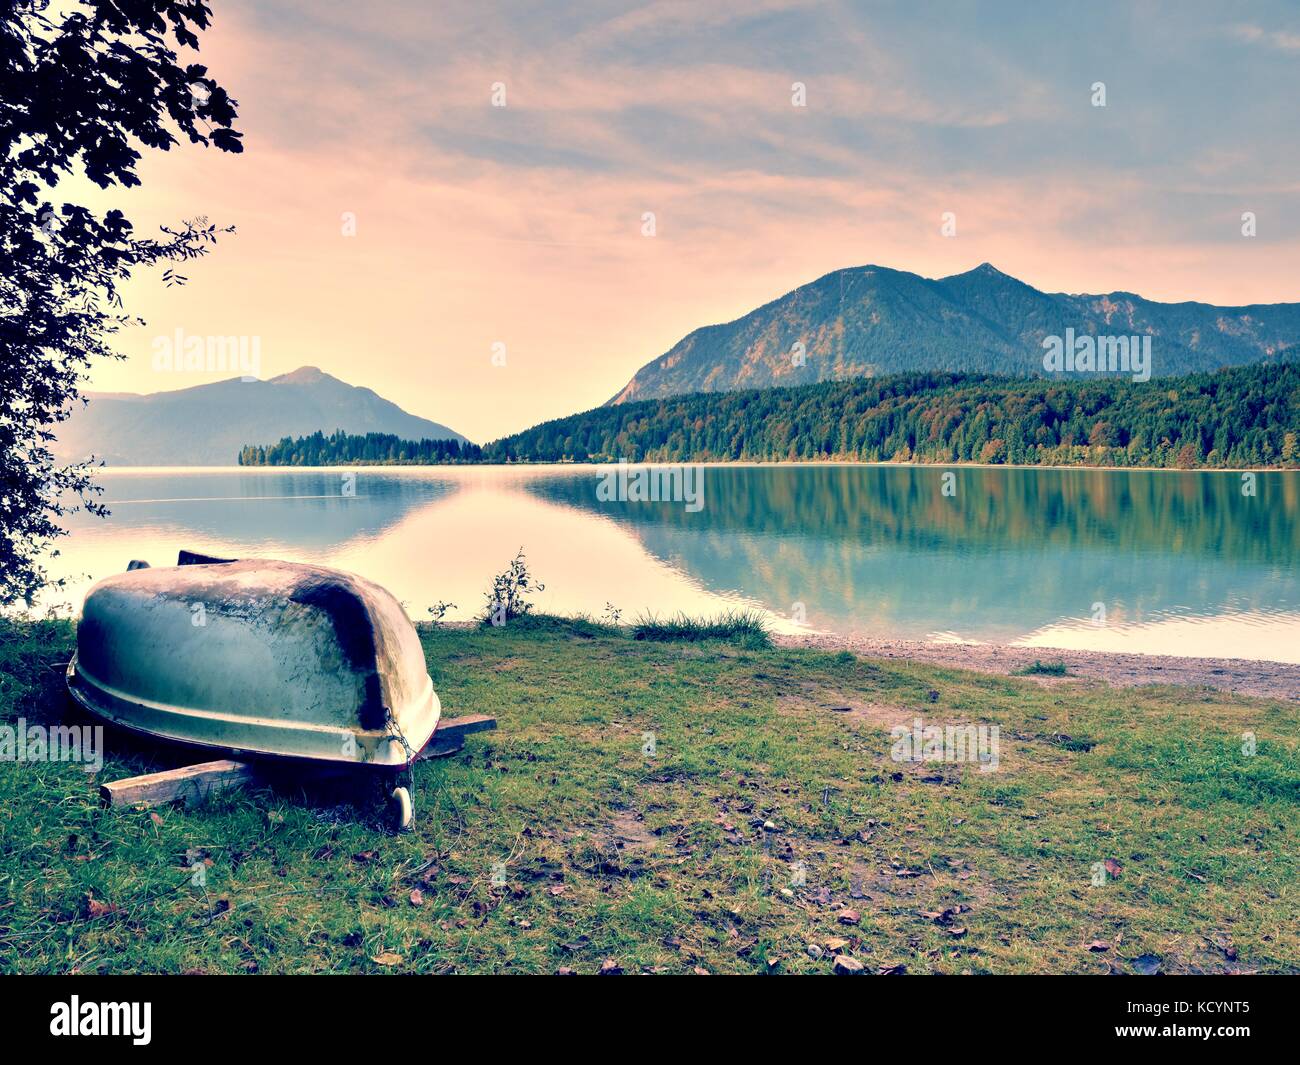 Upside down  fishing paddle boat on bank of Alps lake. Morning autumnal lake. Dramatic and picturesque scene. Mountains in water mirror. Stock Photo